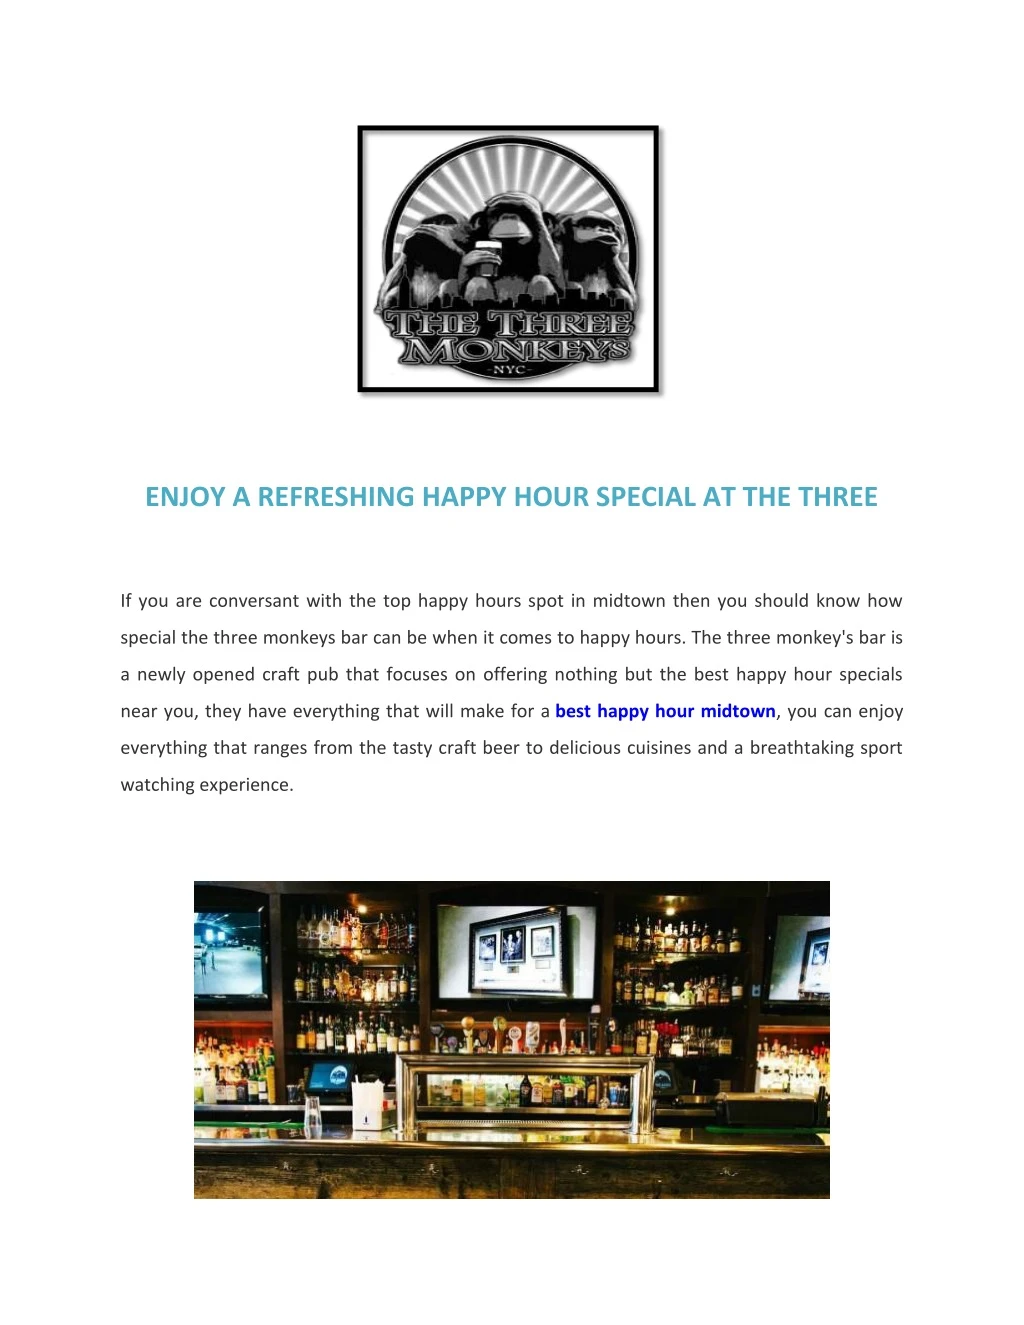 enjoy a refreshing happy hour special at the three